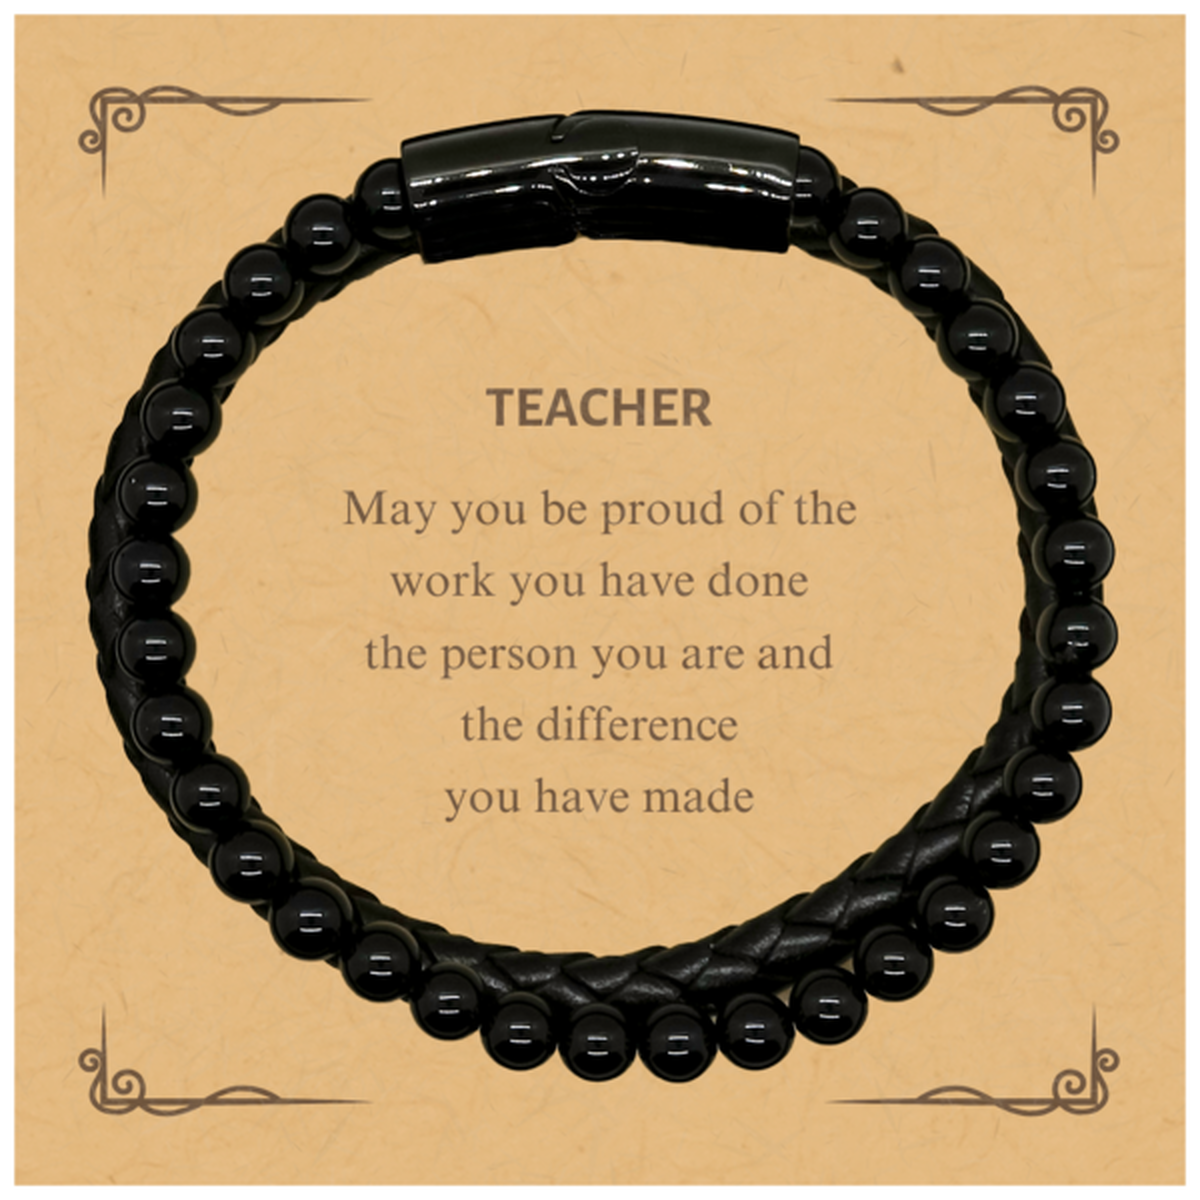 Teacher May you be proud of the work you have done, Retirement Teacher Stone Leather Bracelets for Colleague Appreciation Gifts Amazing for Teacher